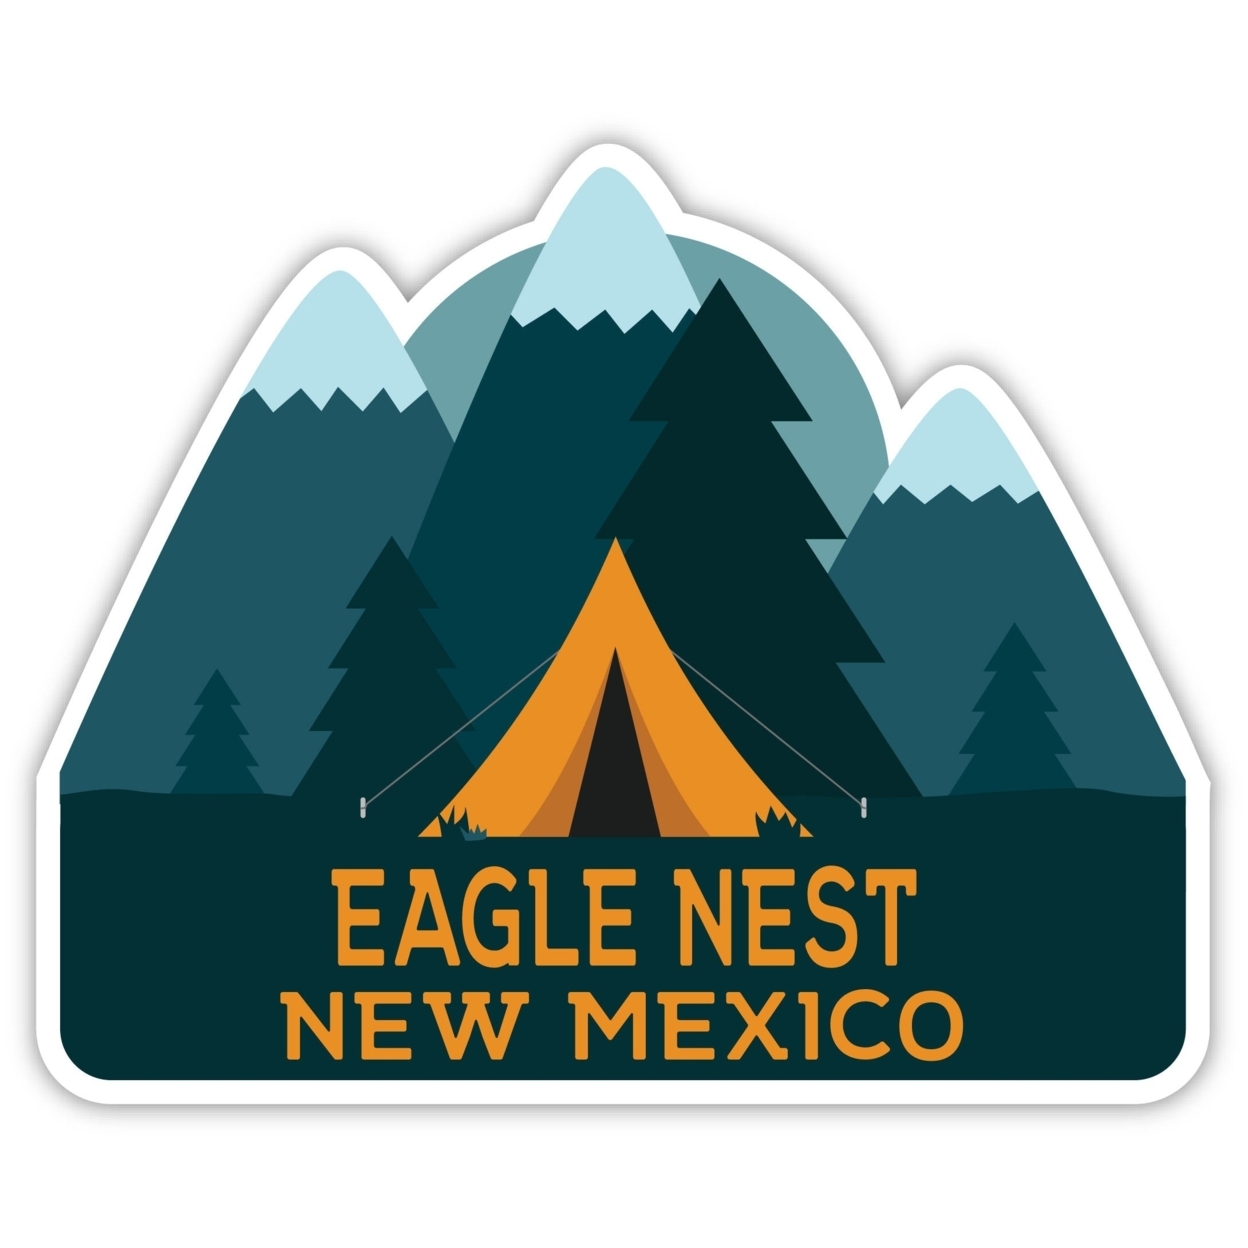 Eagle Nest New Mexico Souvenir Decorative Stickers (Choose Theme And Size) - 4-Pack, 2-Inch, Tent